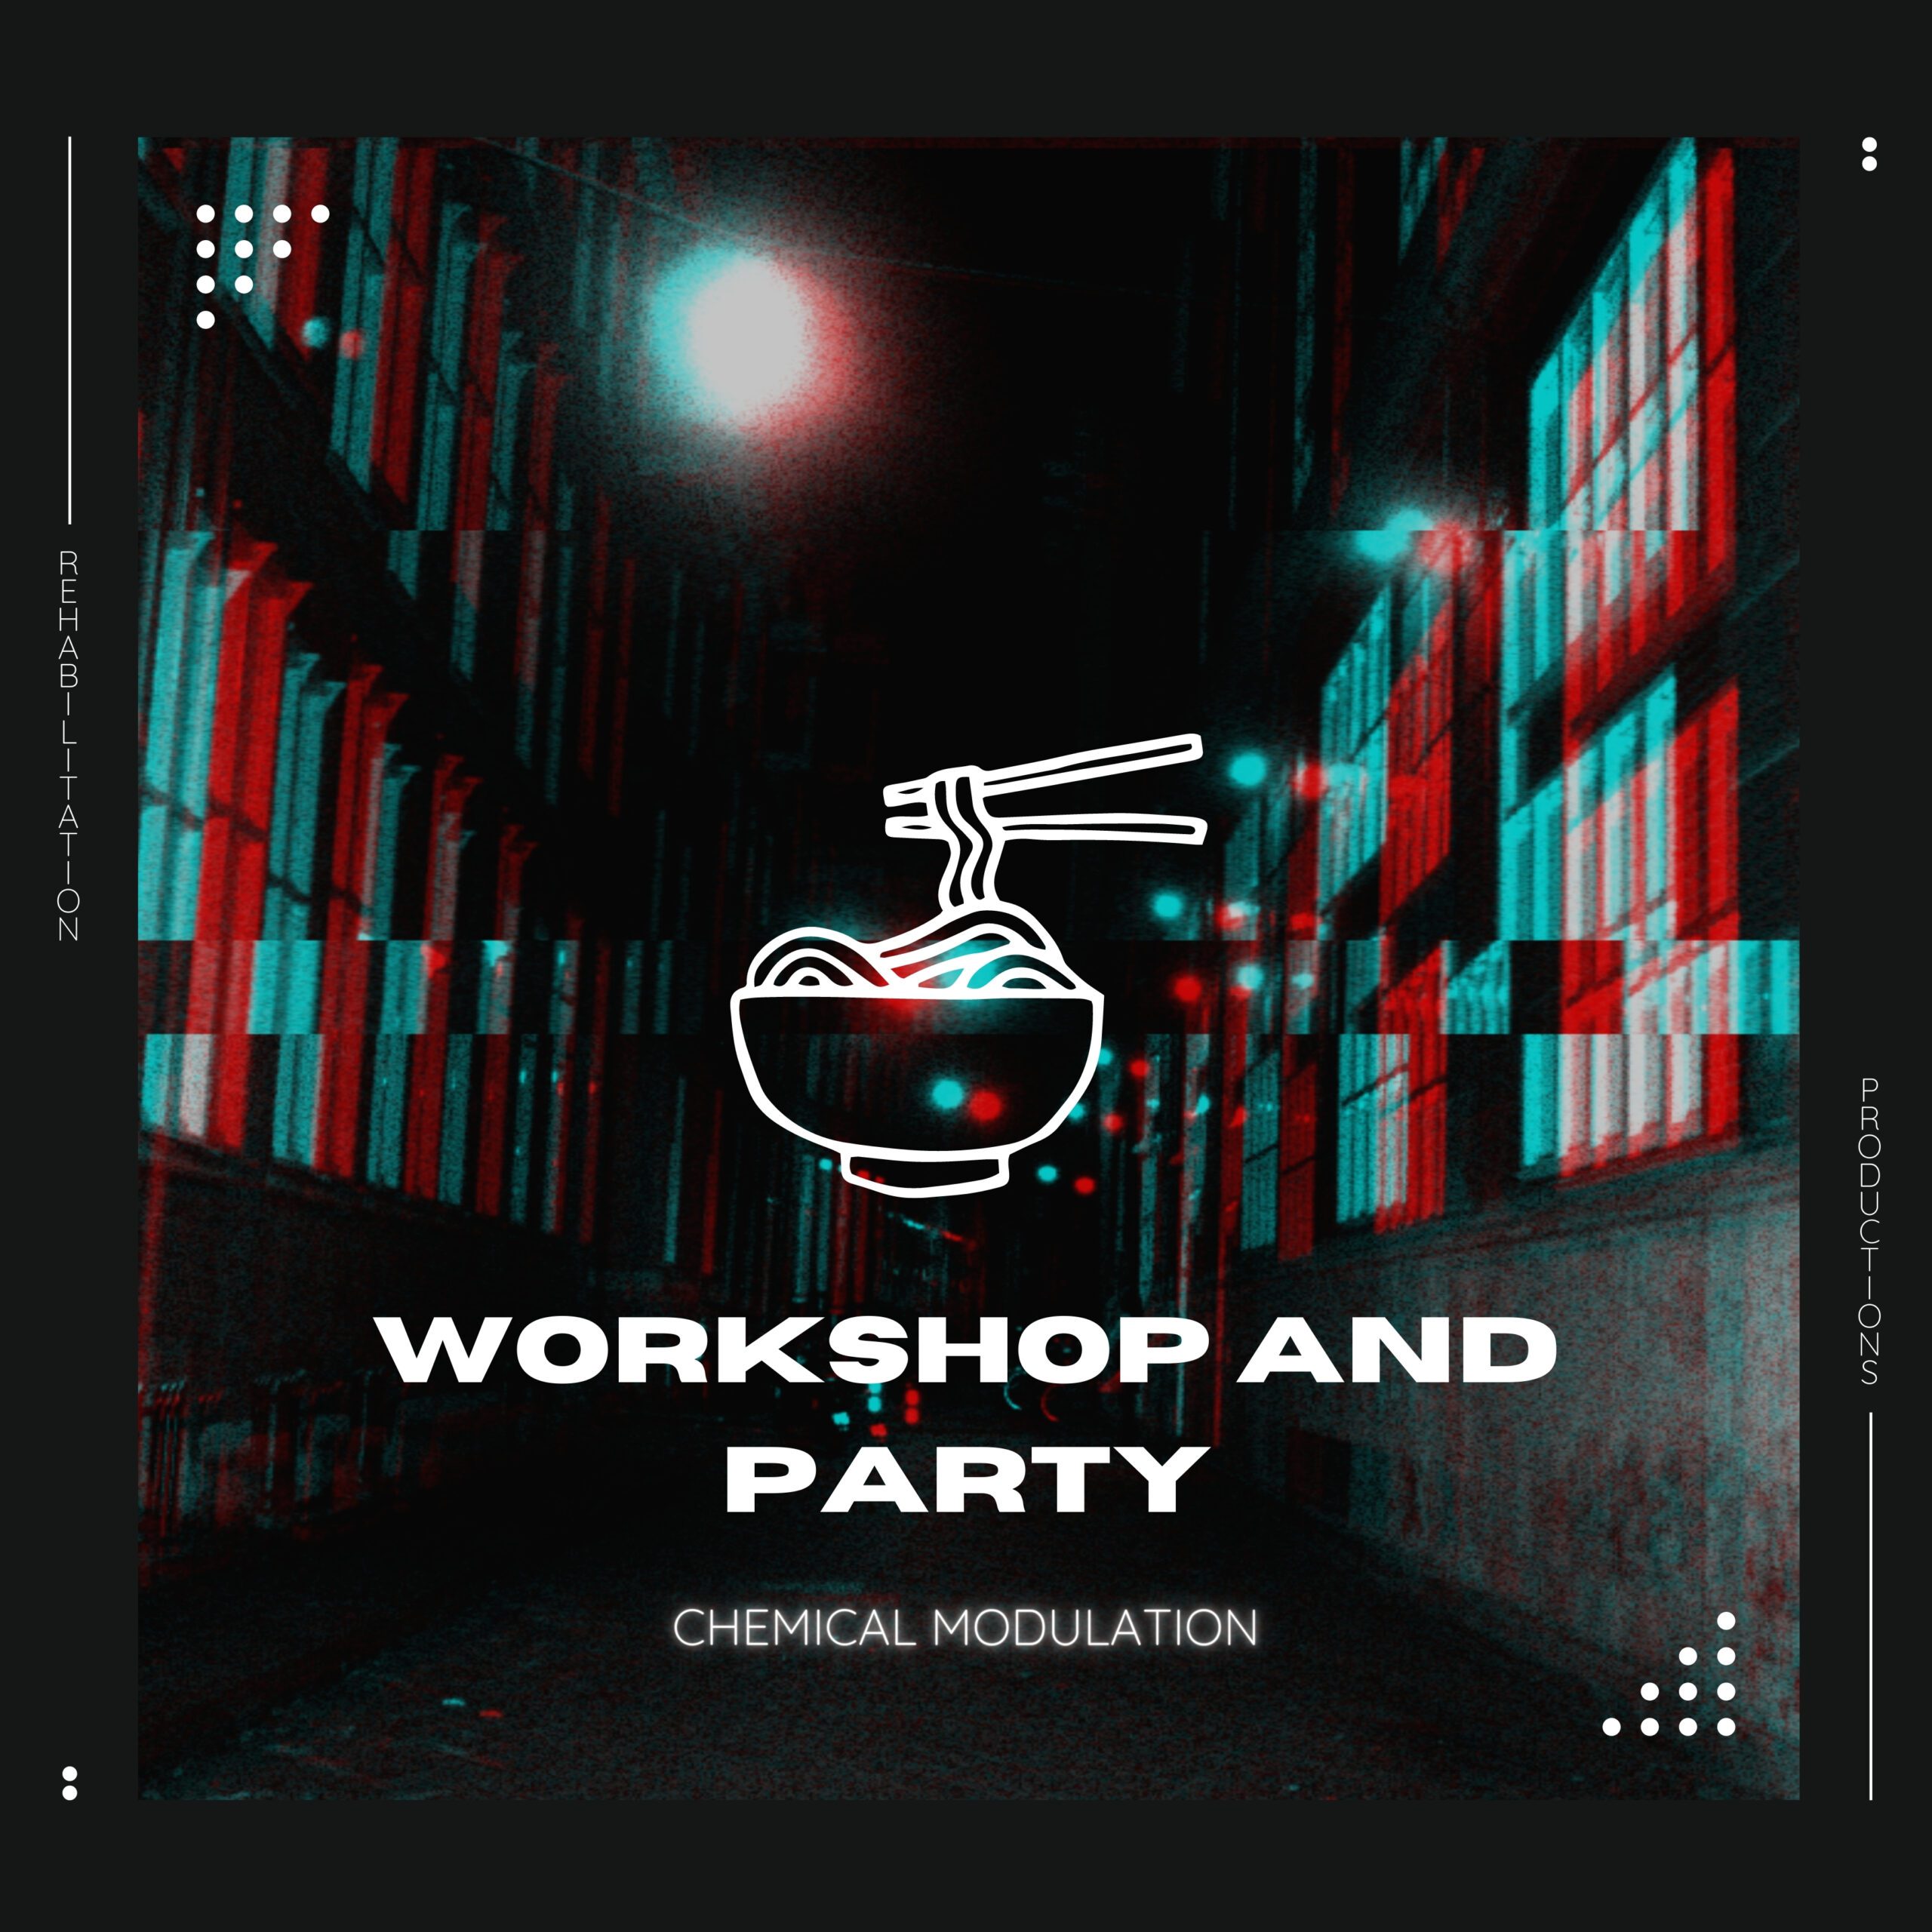 Workshop and Party is out